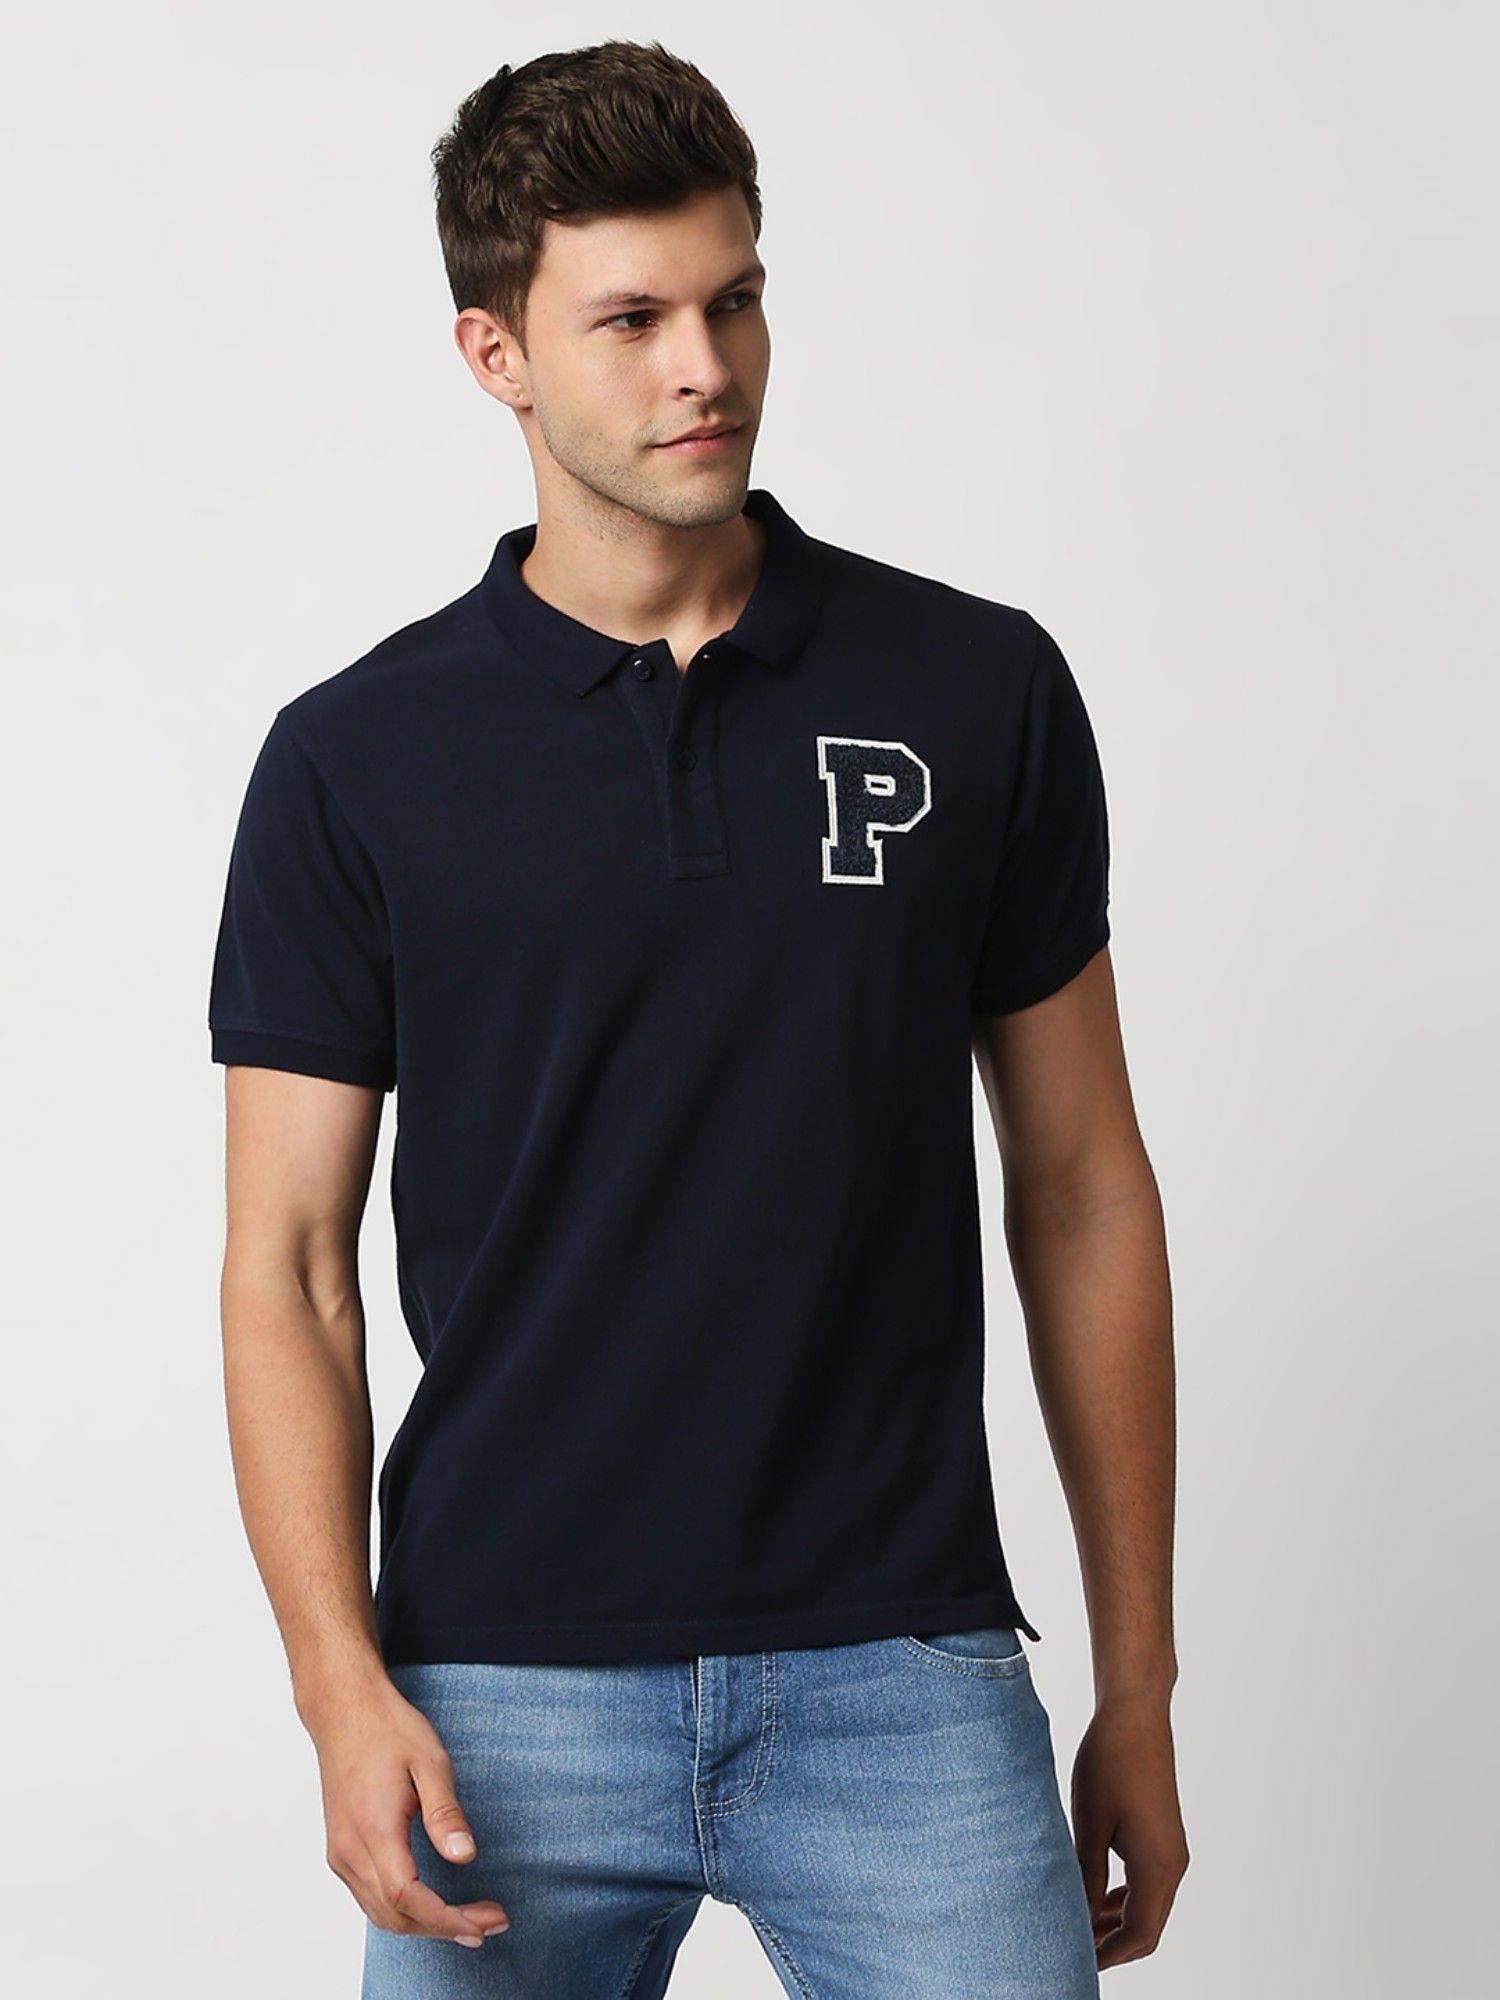 narses towel embroidered navy blue polo t-shirt